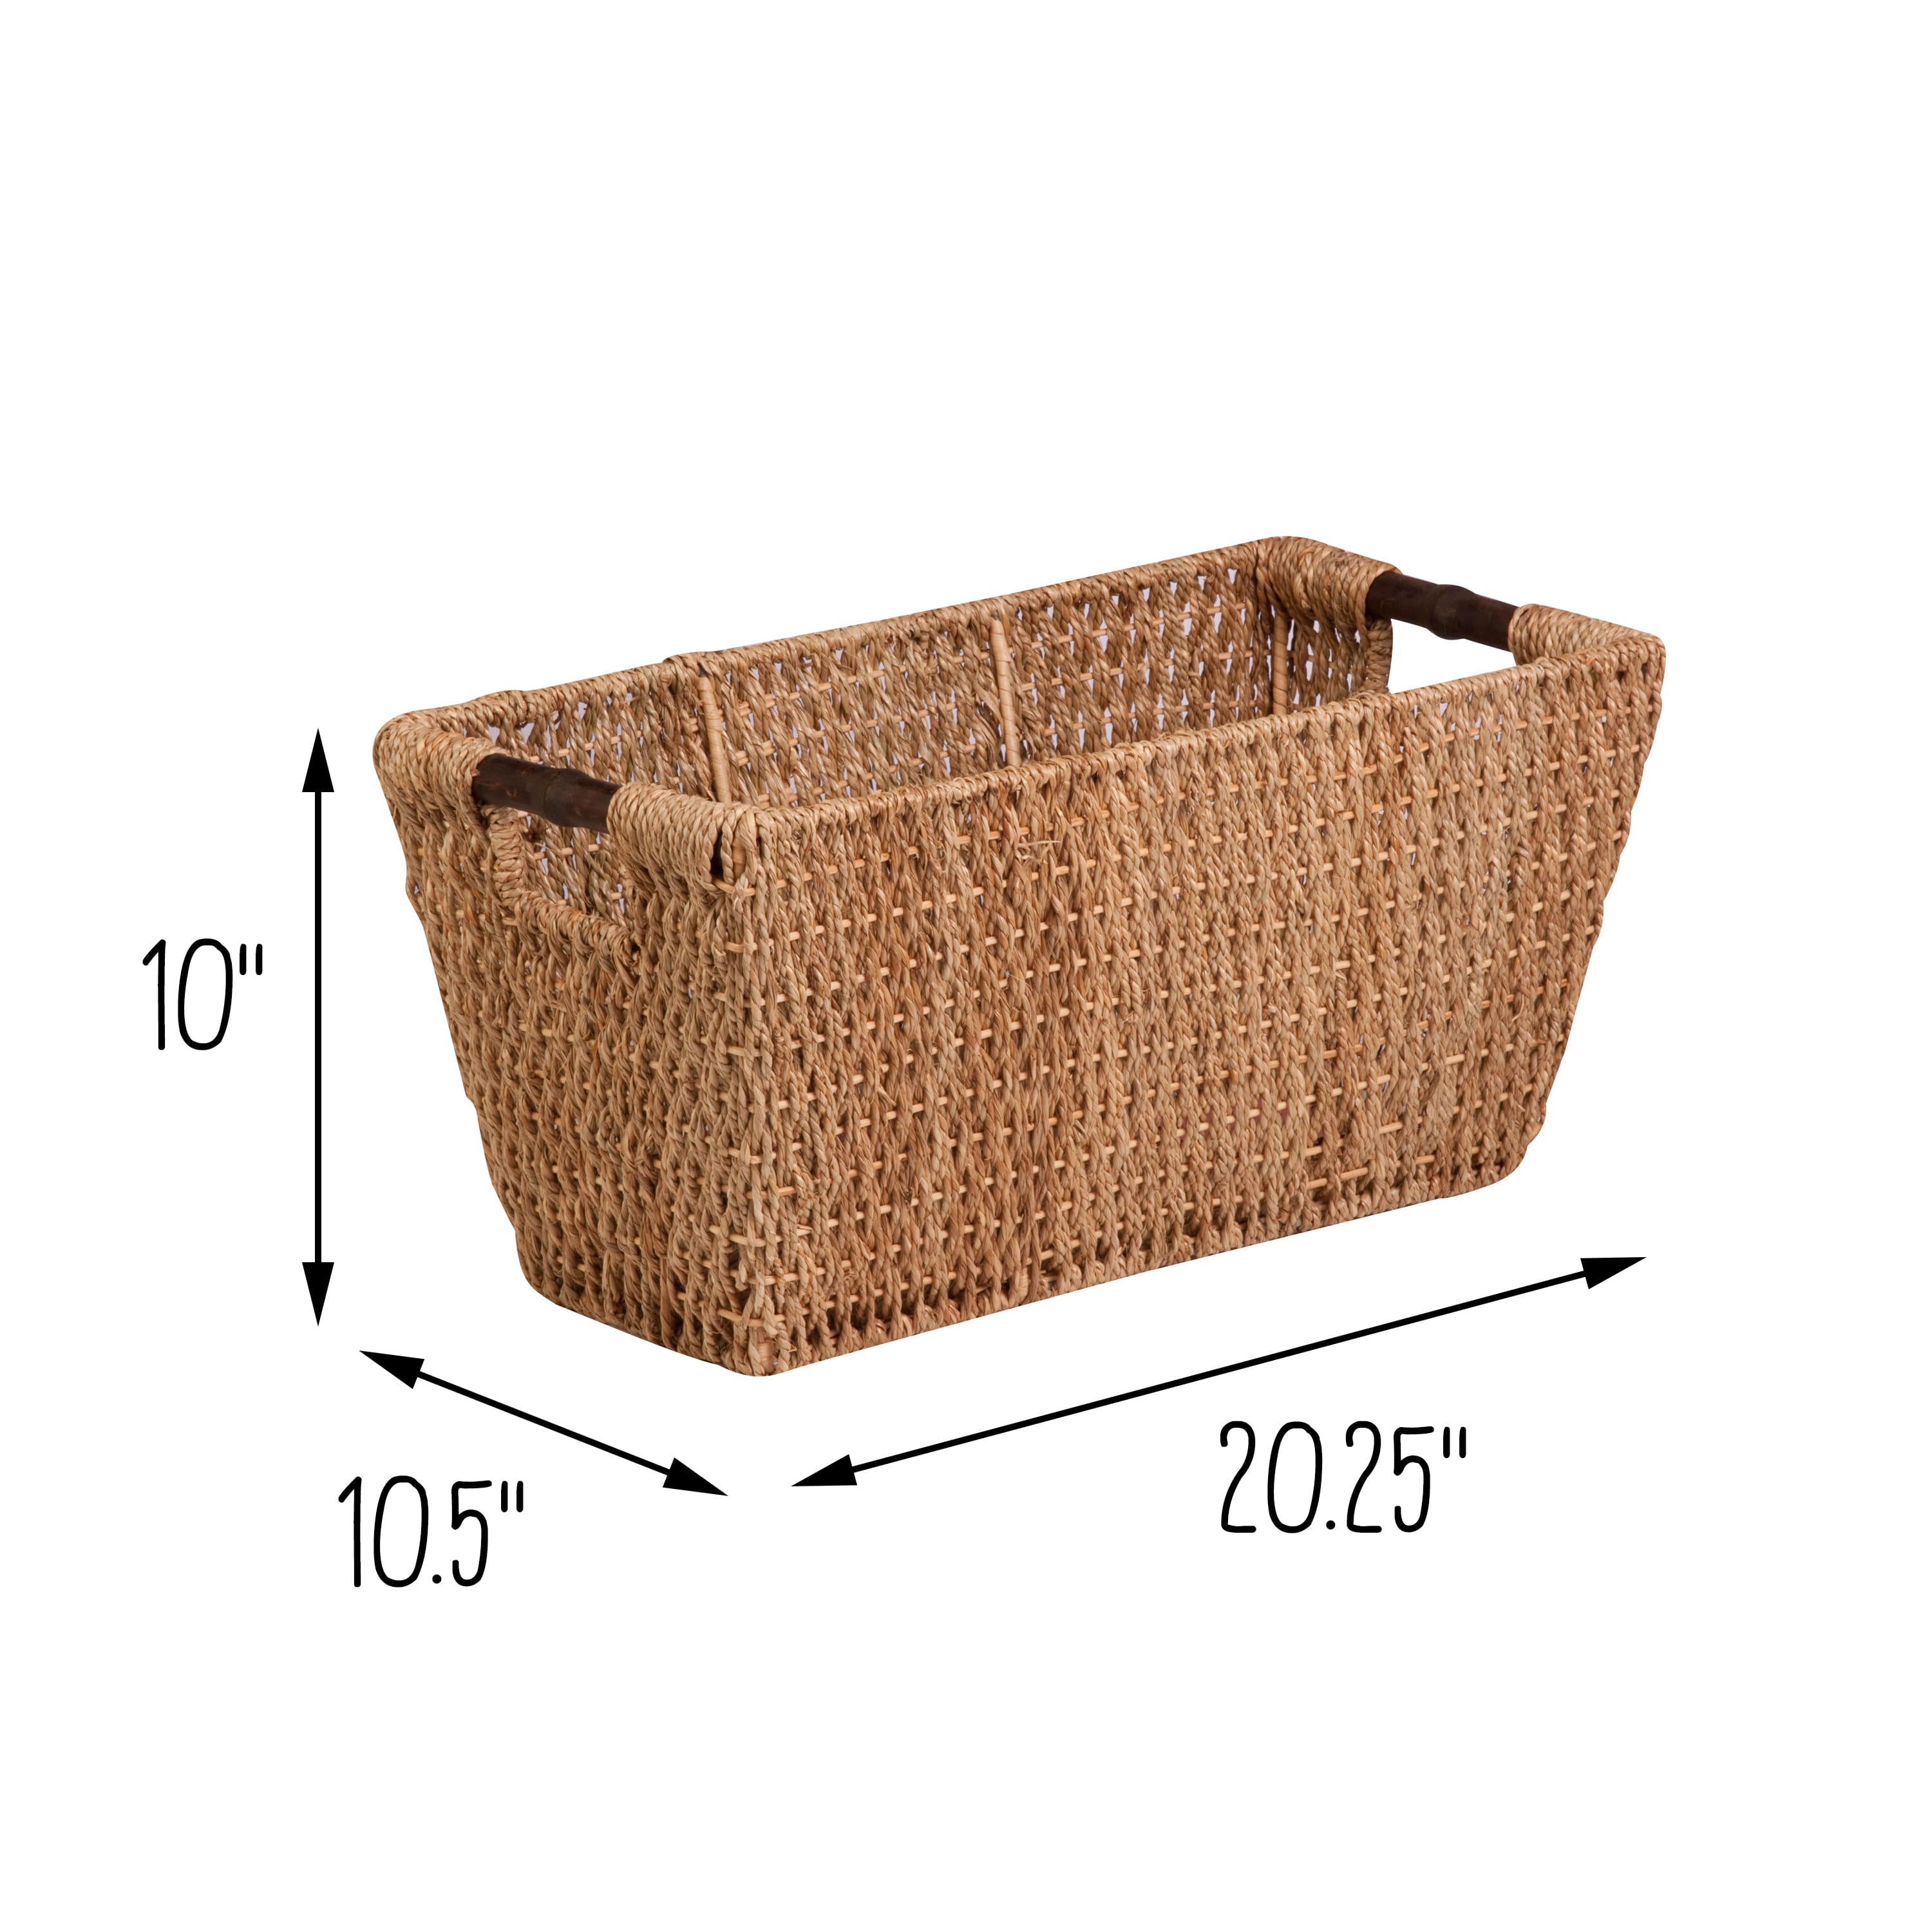 Honey Can Do Natural Large Seagrass Basket